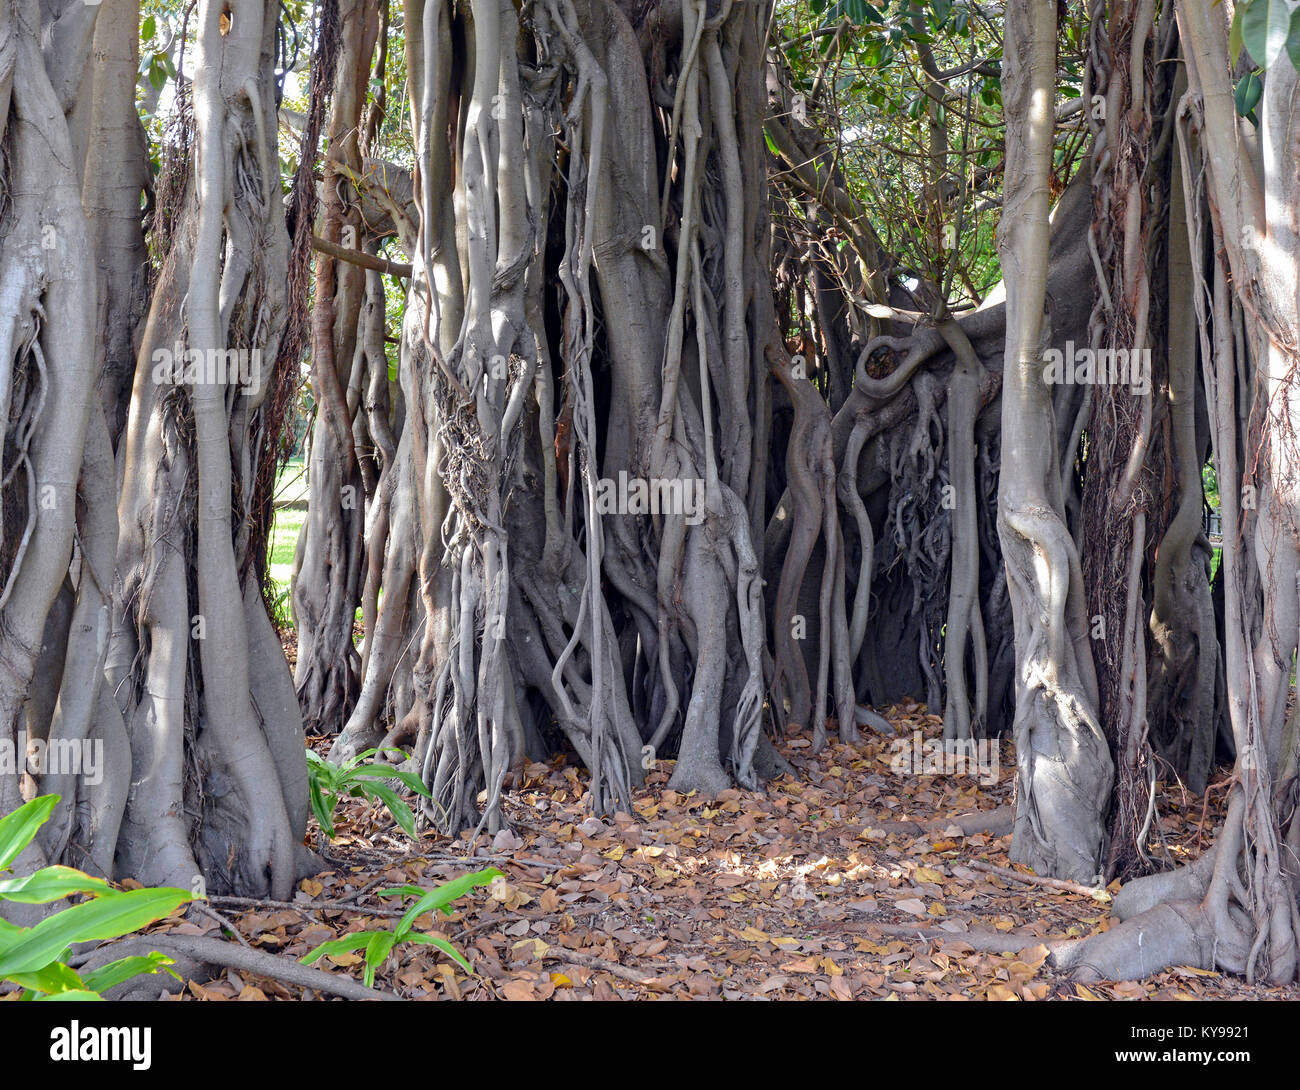 Aerial roots and roots of Banyan tree or Ficus Tree, native to tropical and subtropical climates and is the national tree of India Stock Photo